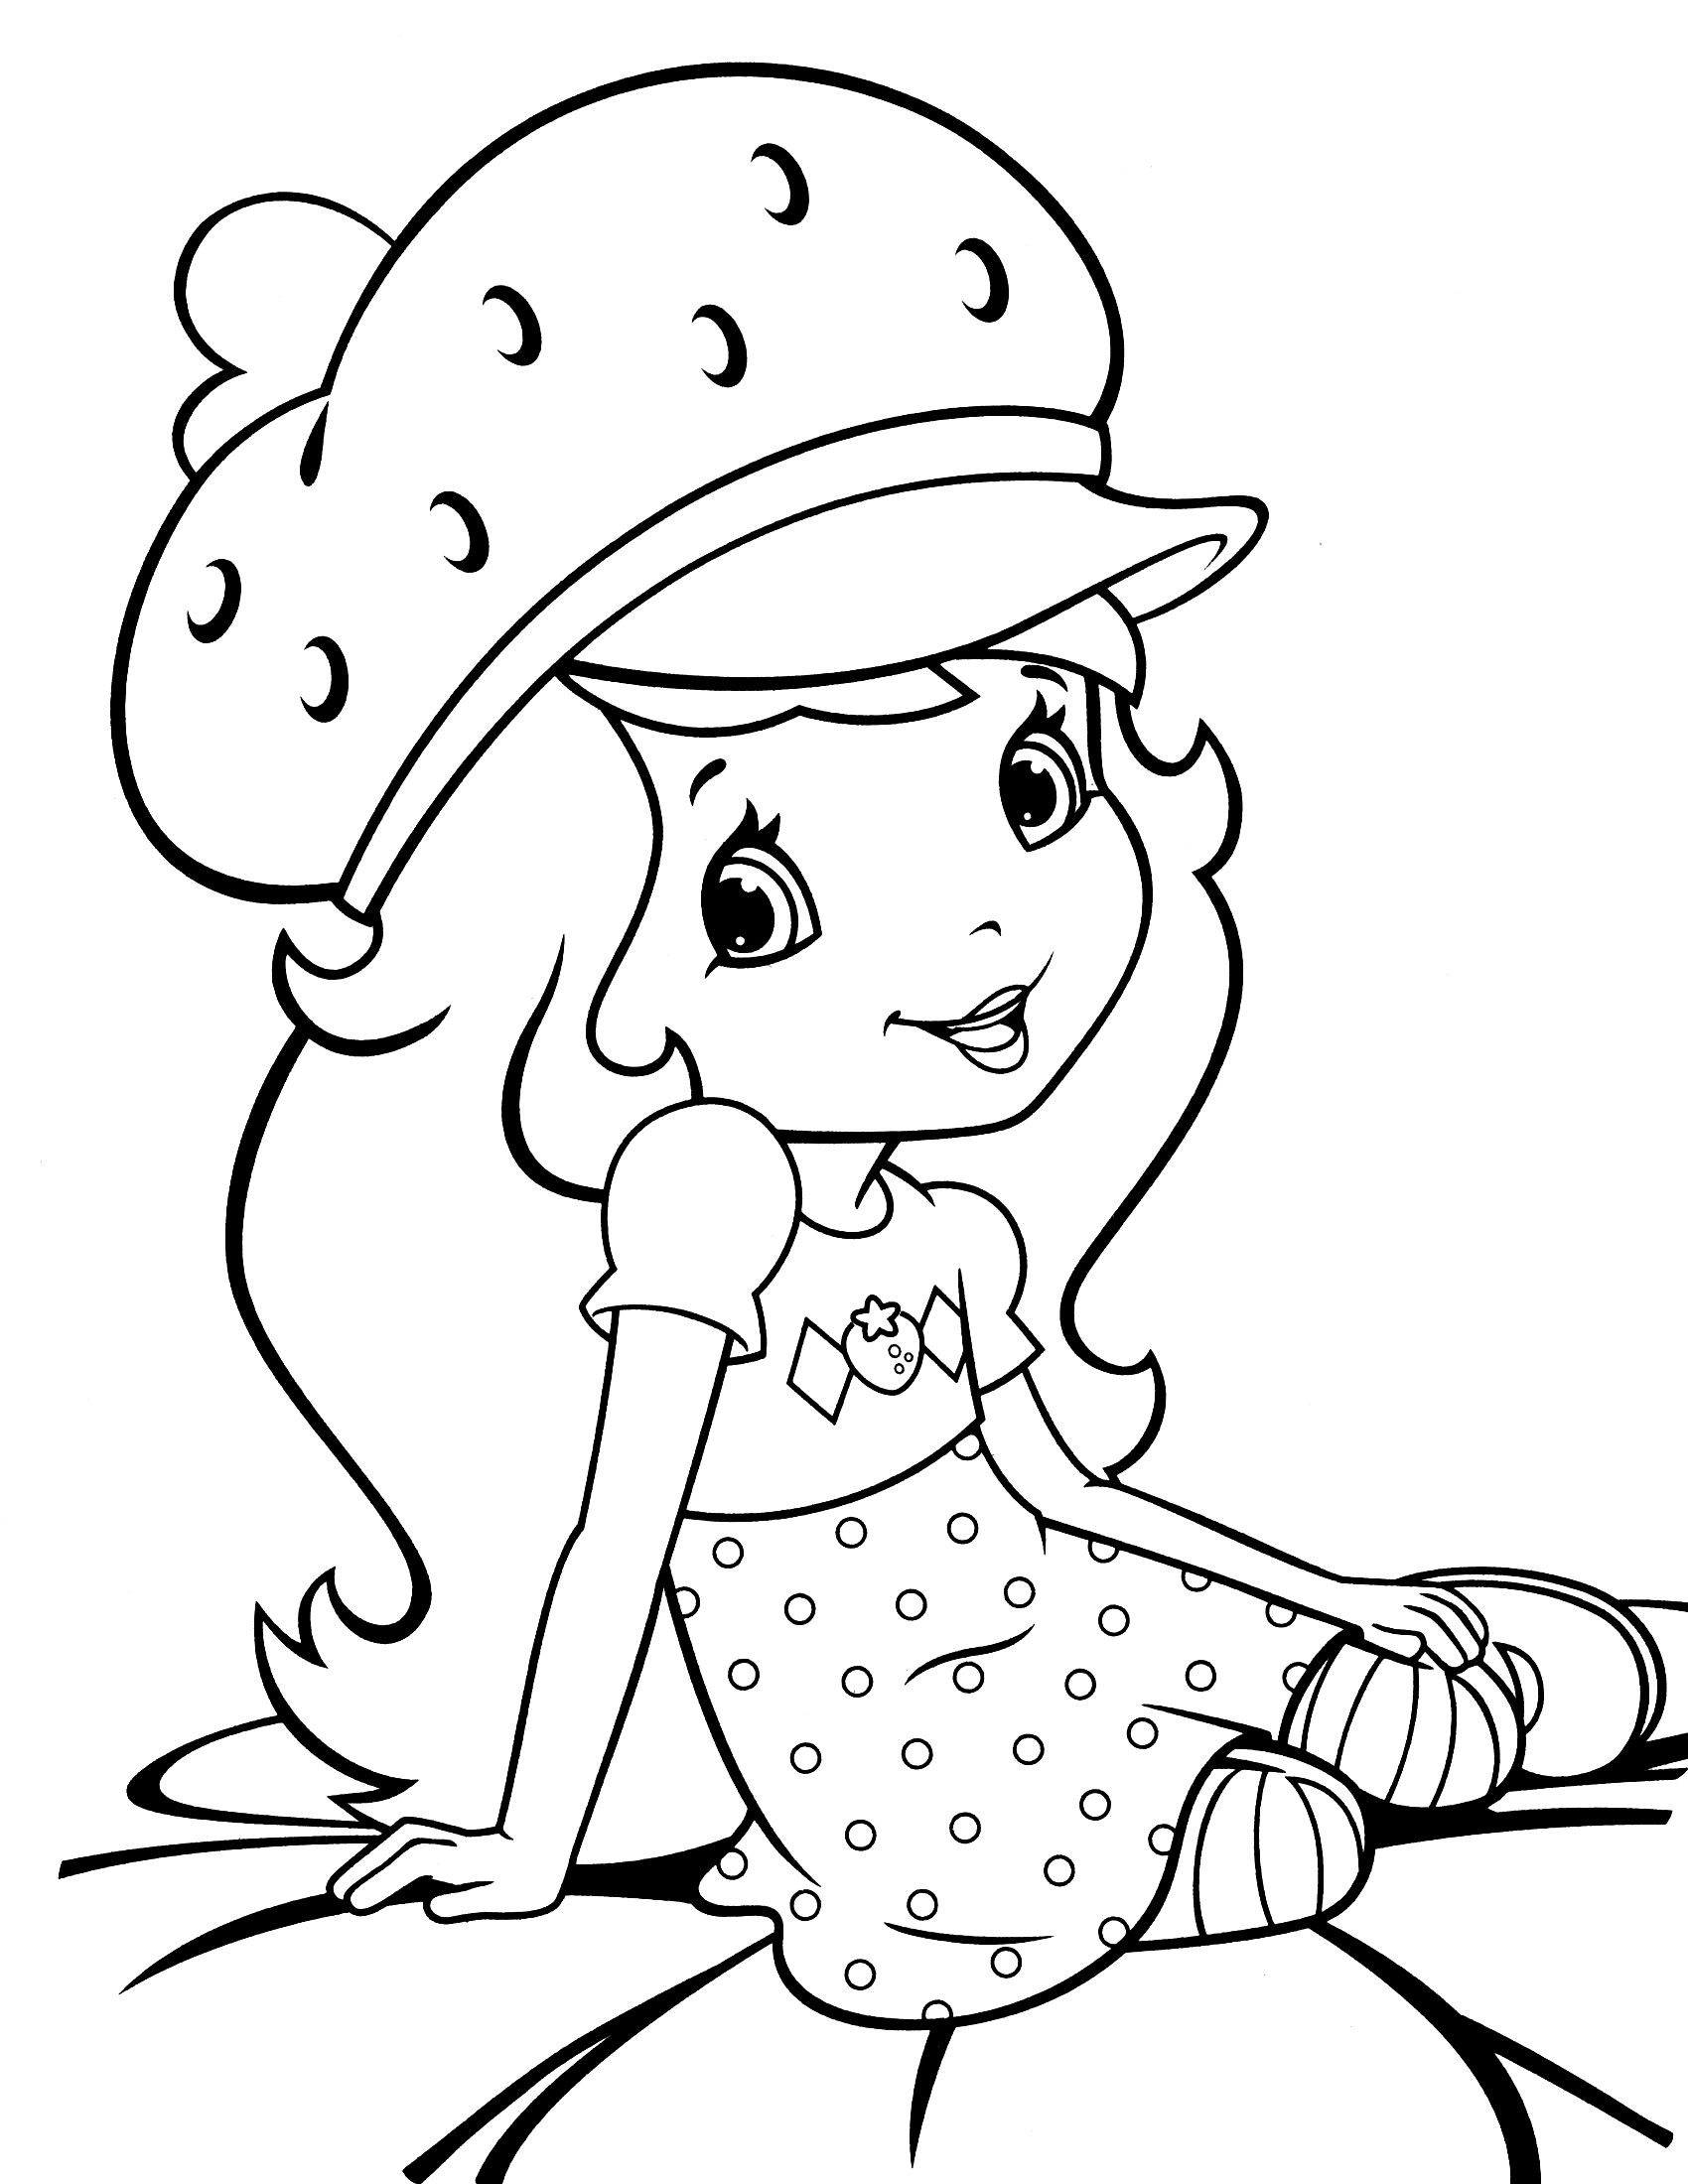 printable-strawberry-shortcake-coloring-pages-printable-world-holiday